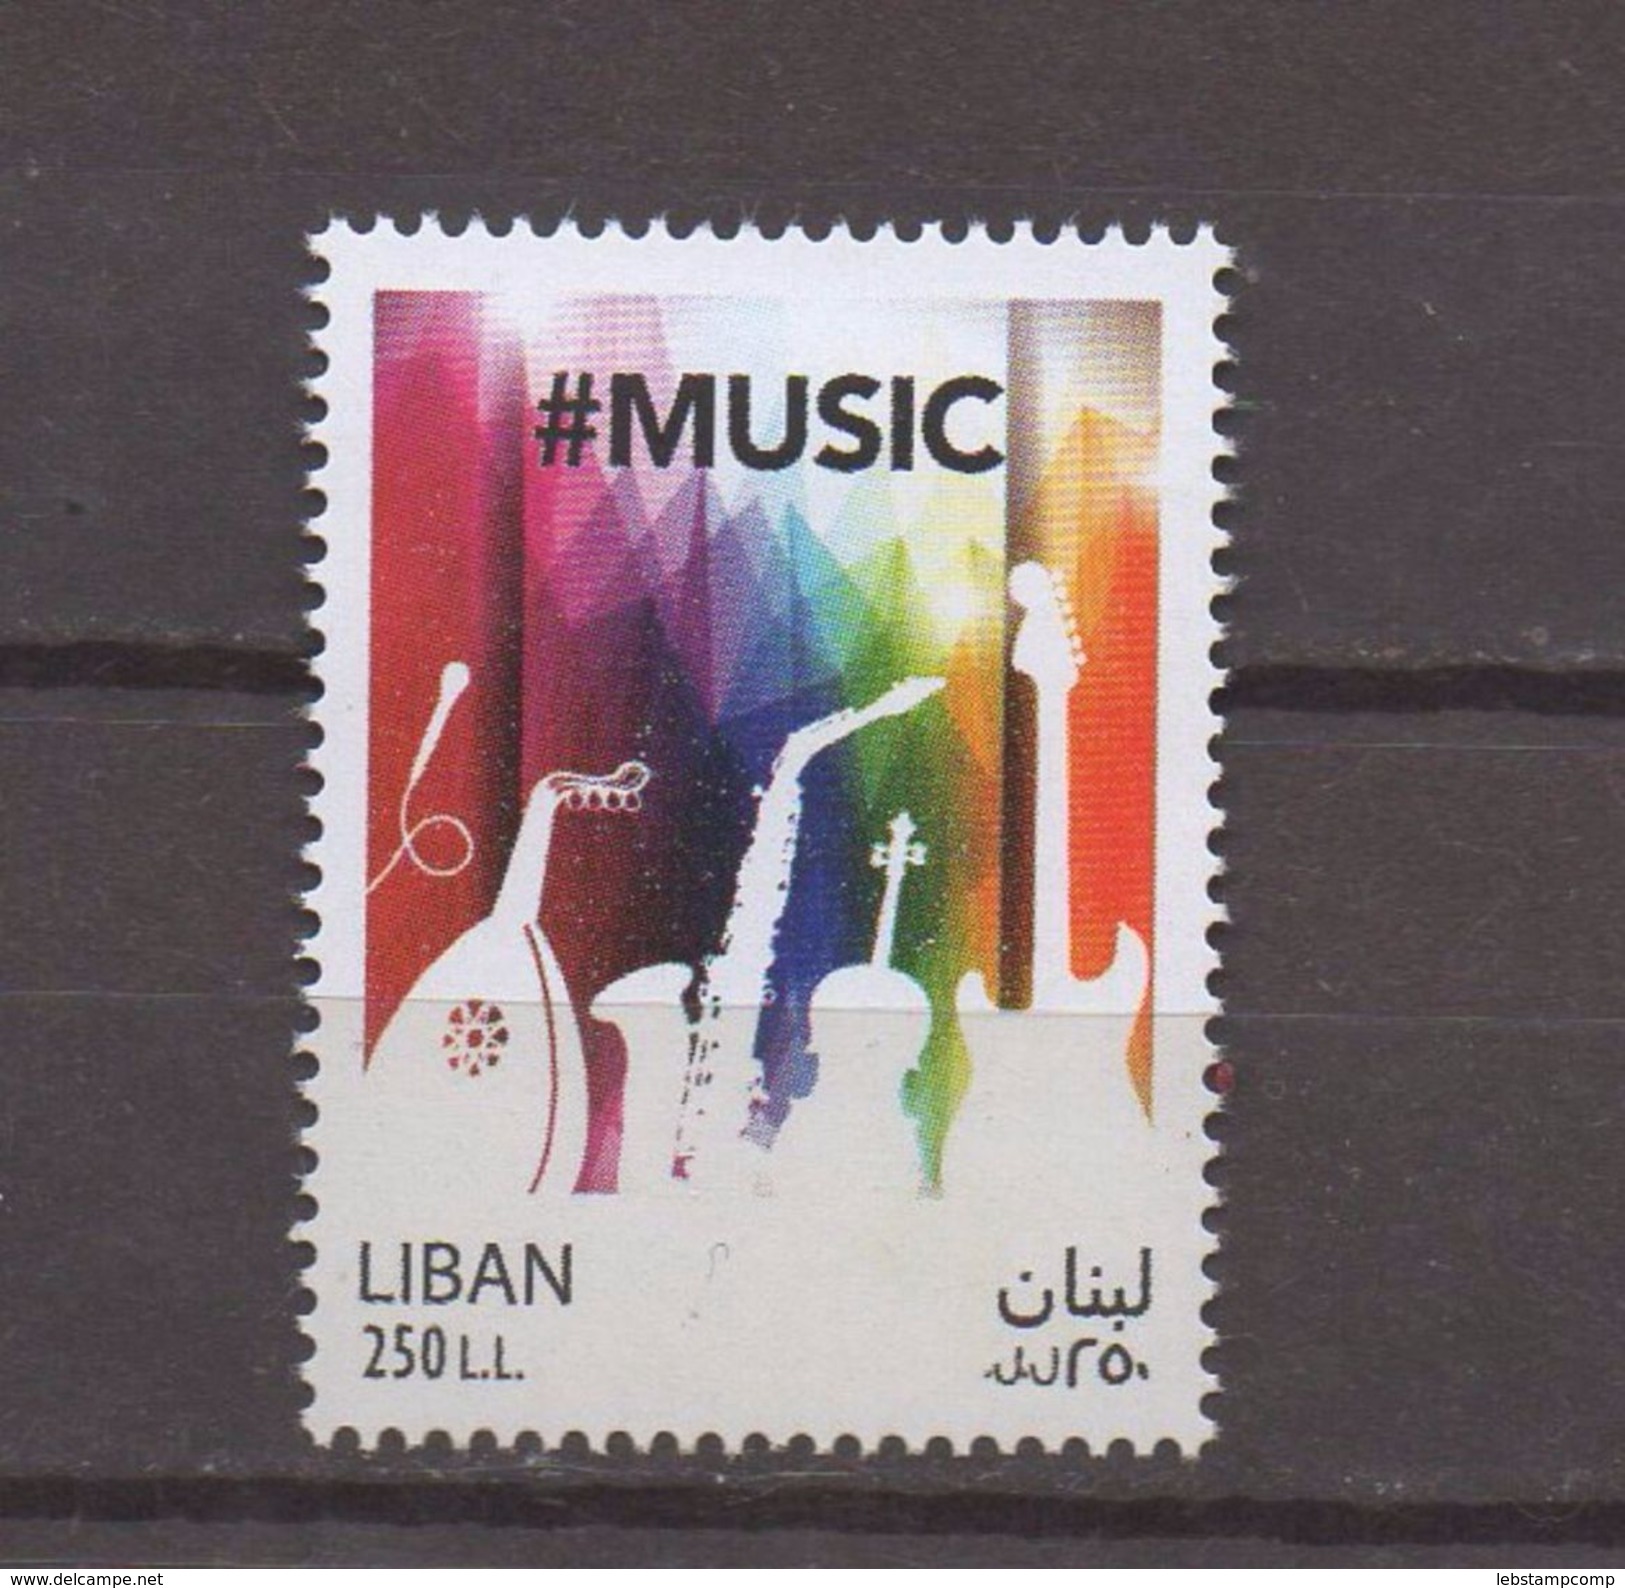 LEBANON, LIBAN WORLD MUSIC DAY MNH STAMP ISSUED IN 2017 - Liban